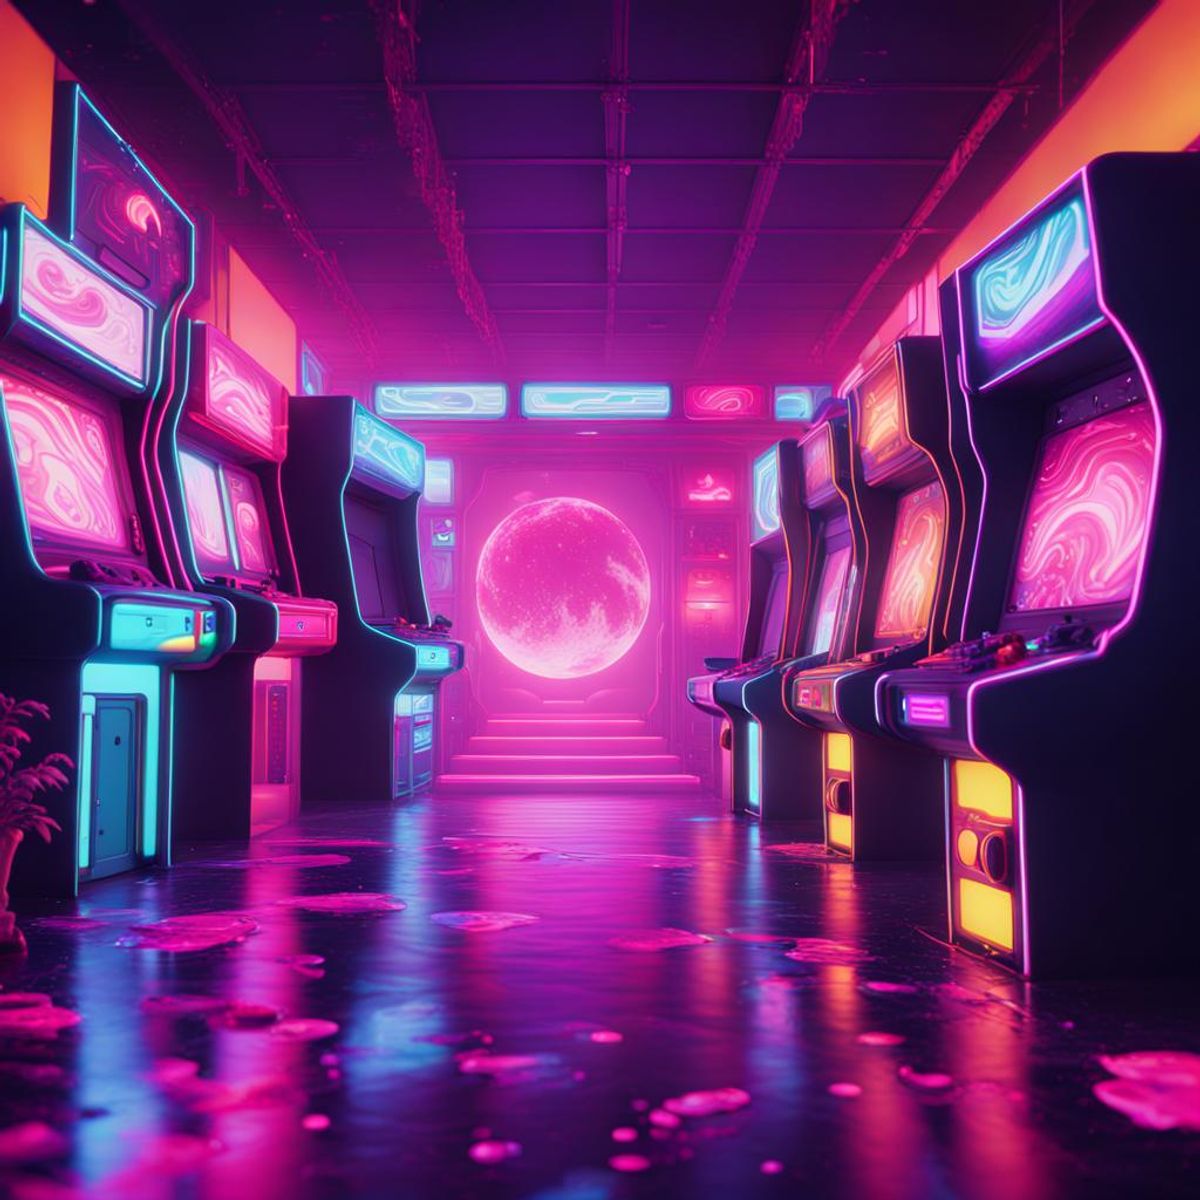 arcade vaporwave dreamy, surreal with neon colors, glitch effects, and ...